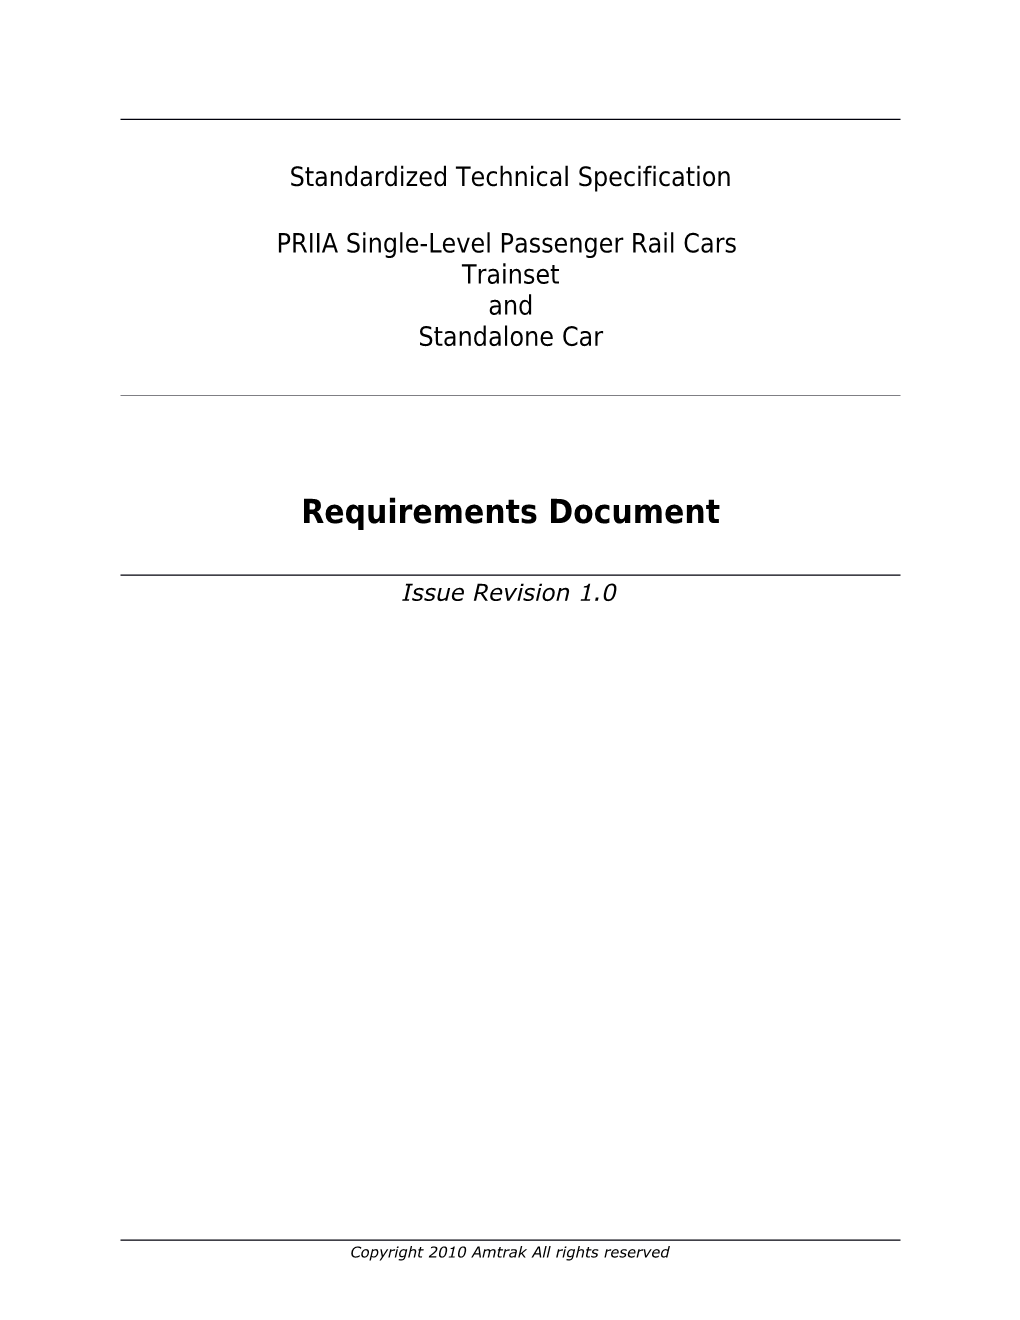 Single-Level Trainset and Standalone Requirements DRAFT R01-Changes